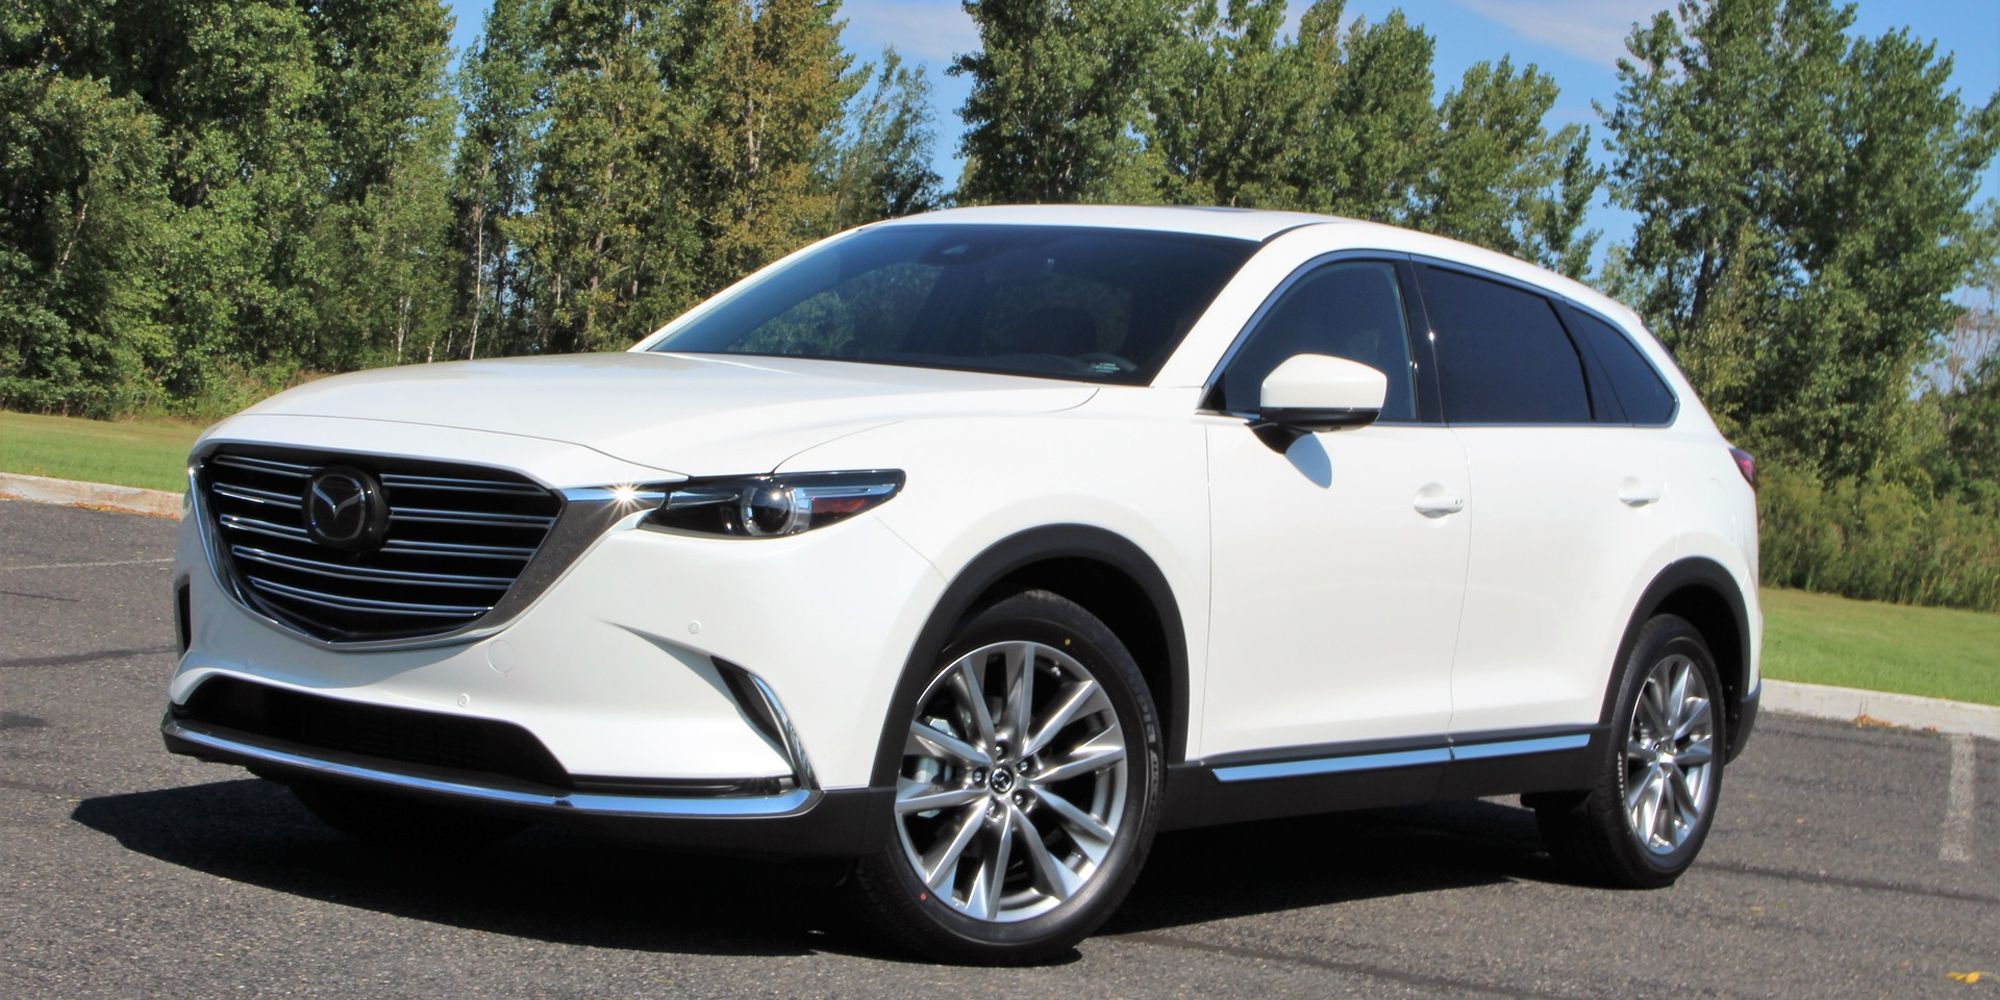 The front of a white CX-9